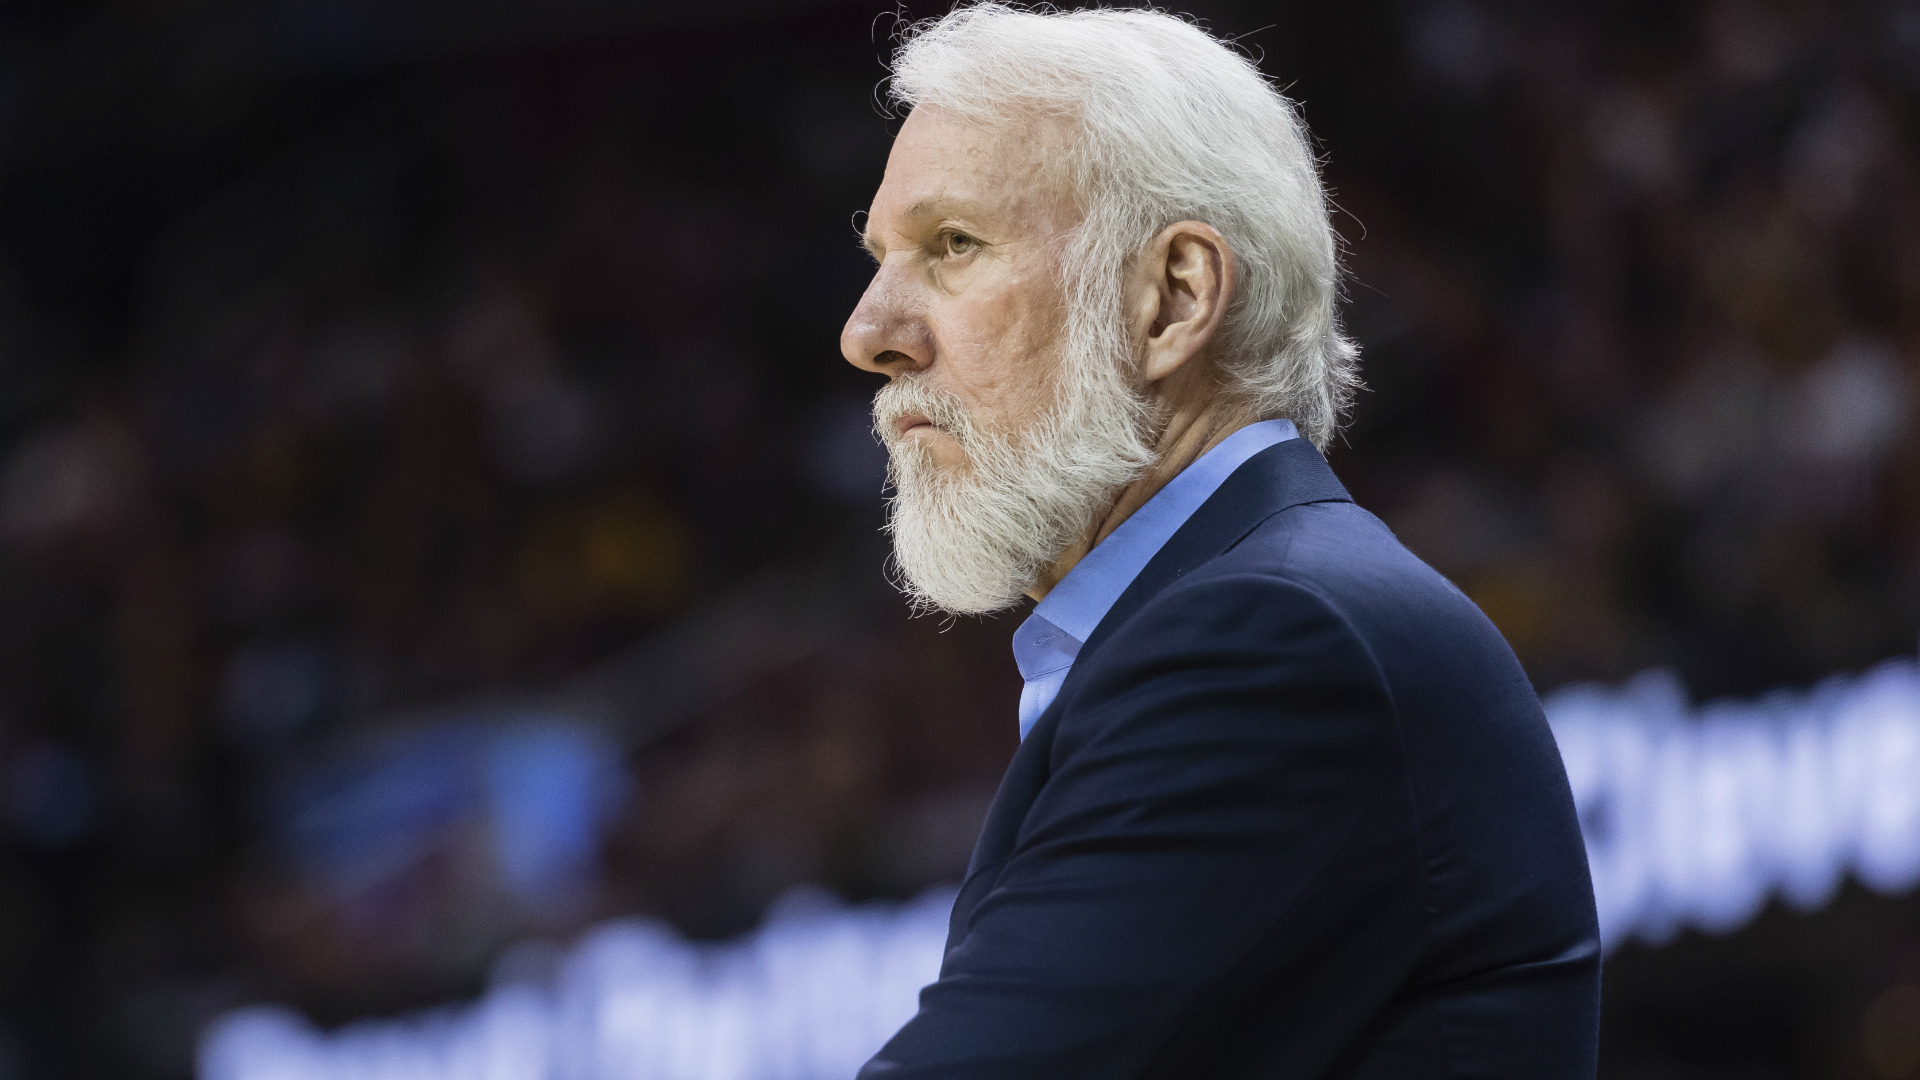 Since arriving in 1996, Gregg Popovich has delivered five NBA titles to the San Antonio Spurs and Phil Coles lauded the 70-year-old.